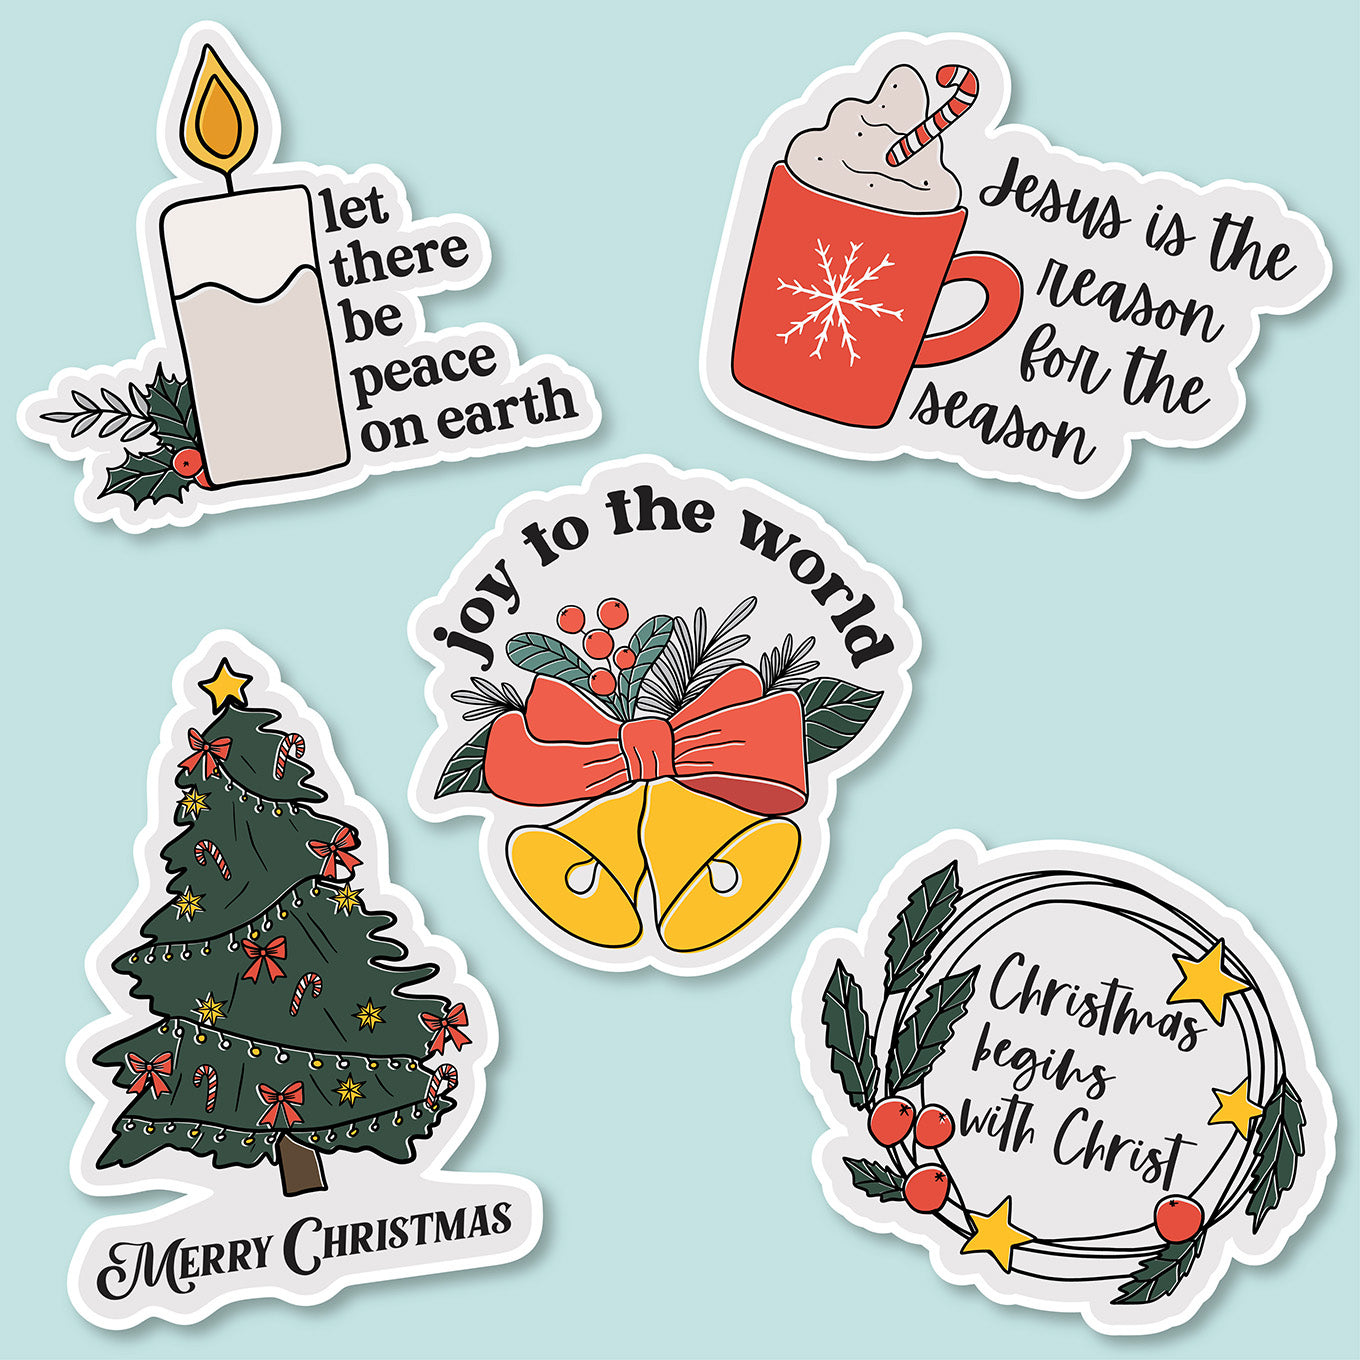 Five Christians stickers that celebrate the birth of Christ